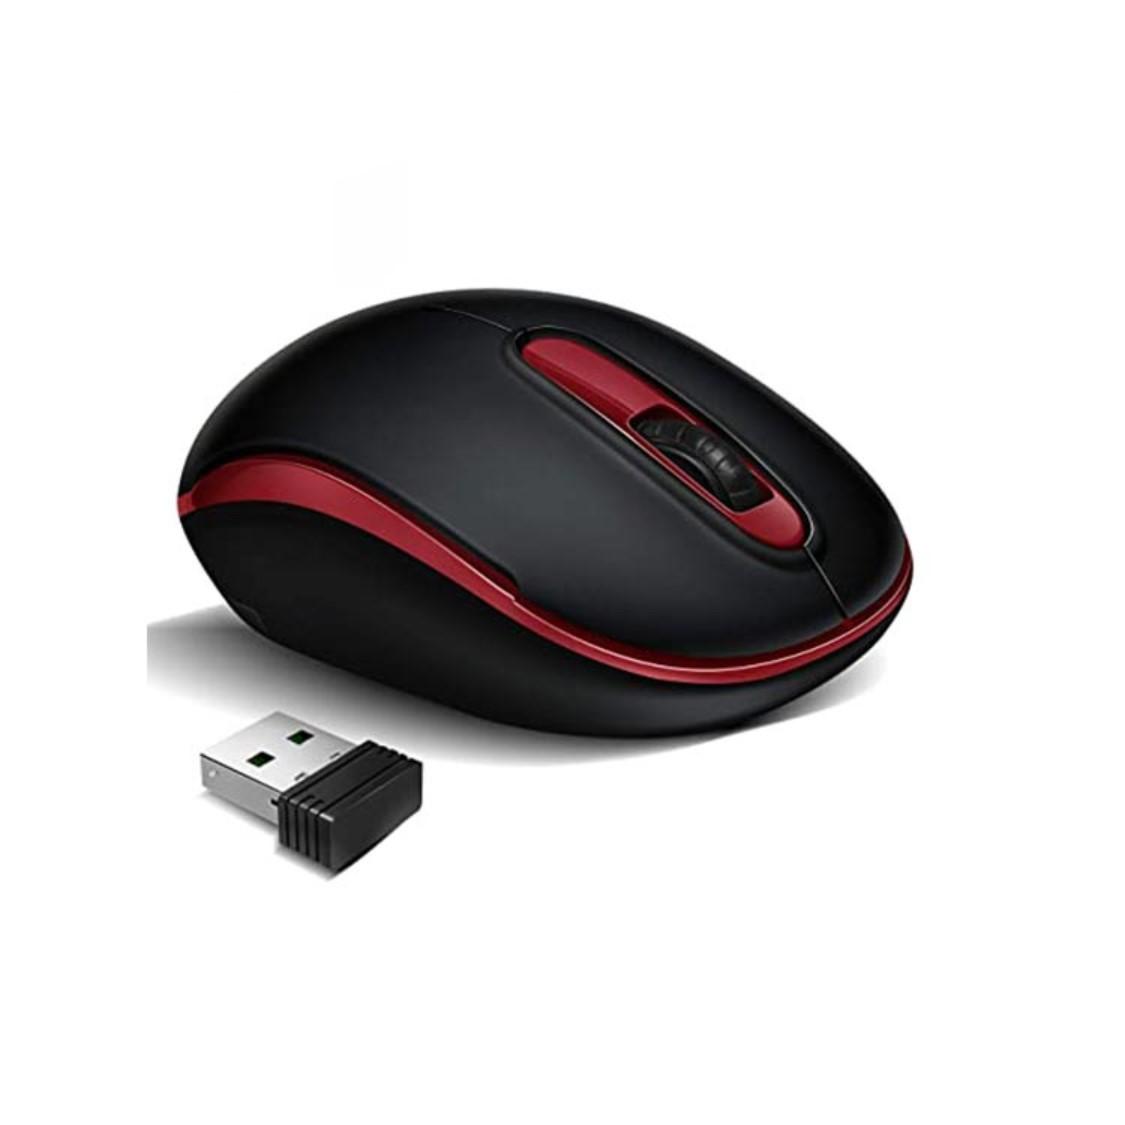 Optical Wireless Mouse, Black and Red - LGC-CMU02